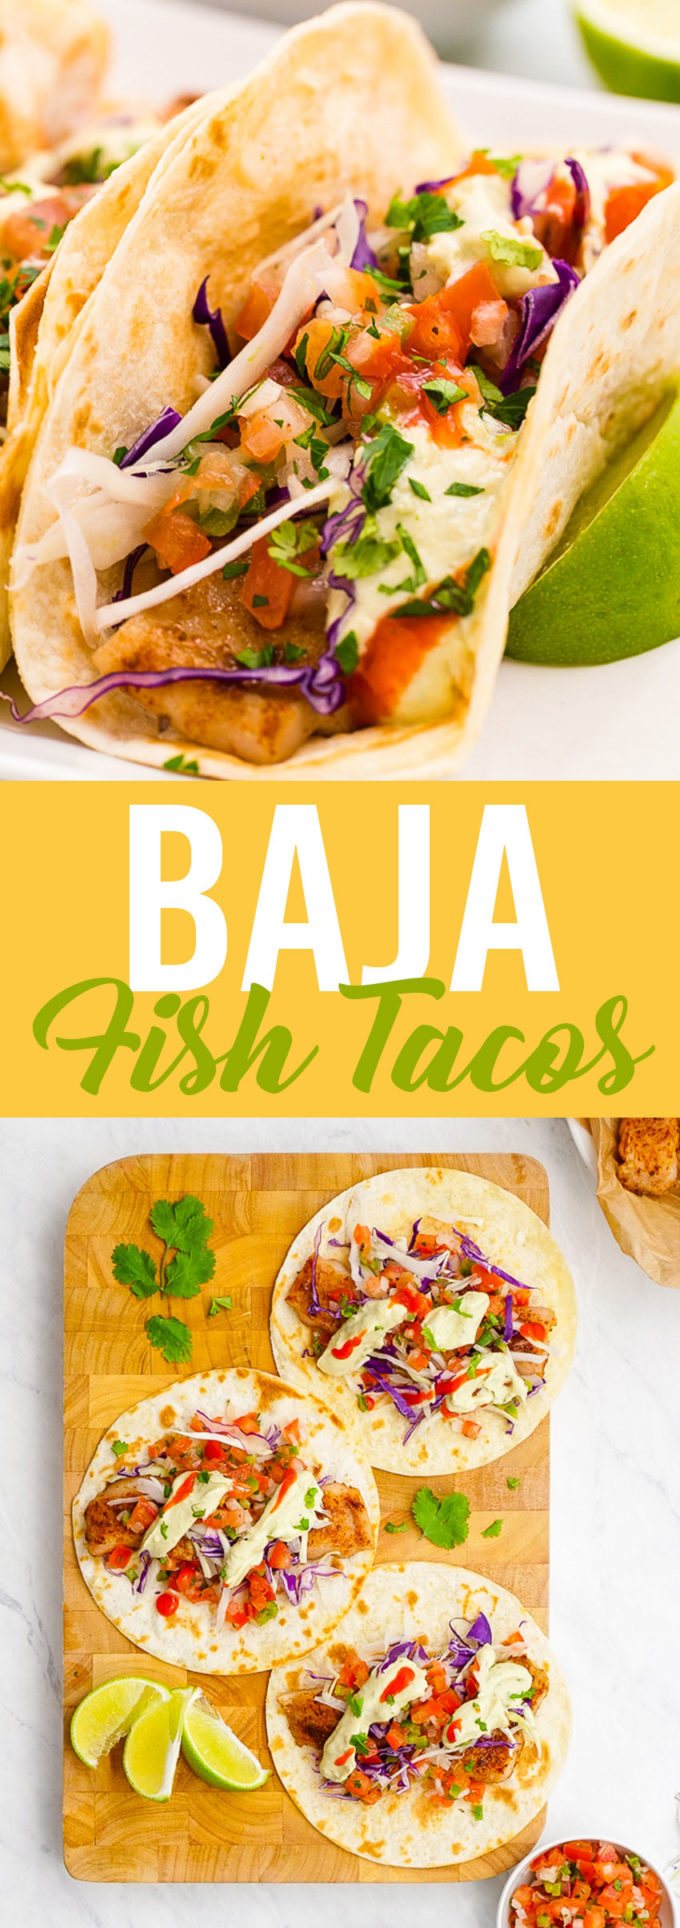 These lightened up Baja fish tacos boast huge flavors without the battering or deep frying. Delicious baked fish, pico, and avocado creme. 